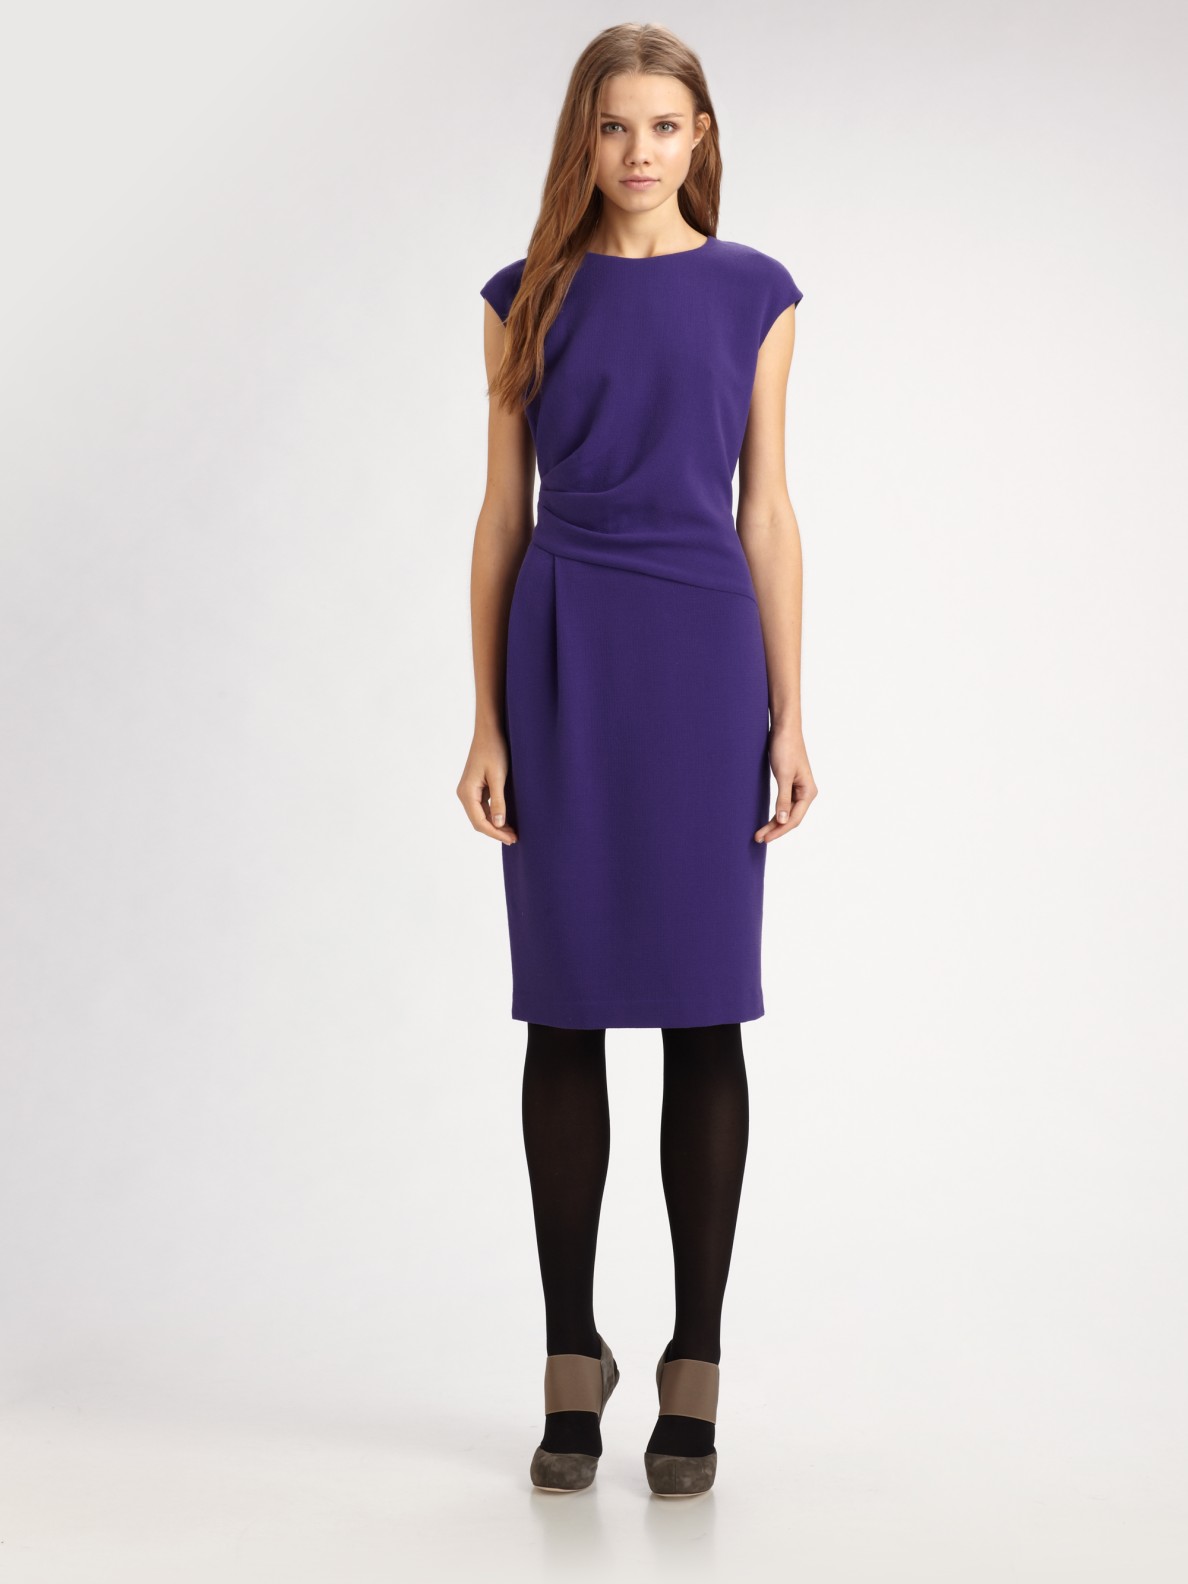 Lafayette 148 new york Ruched Wool Crepe Dress in Purple | Lyst